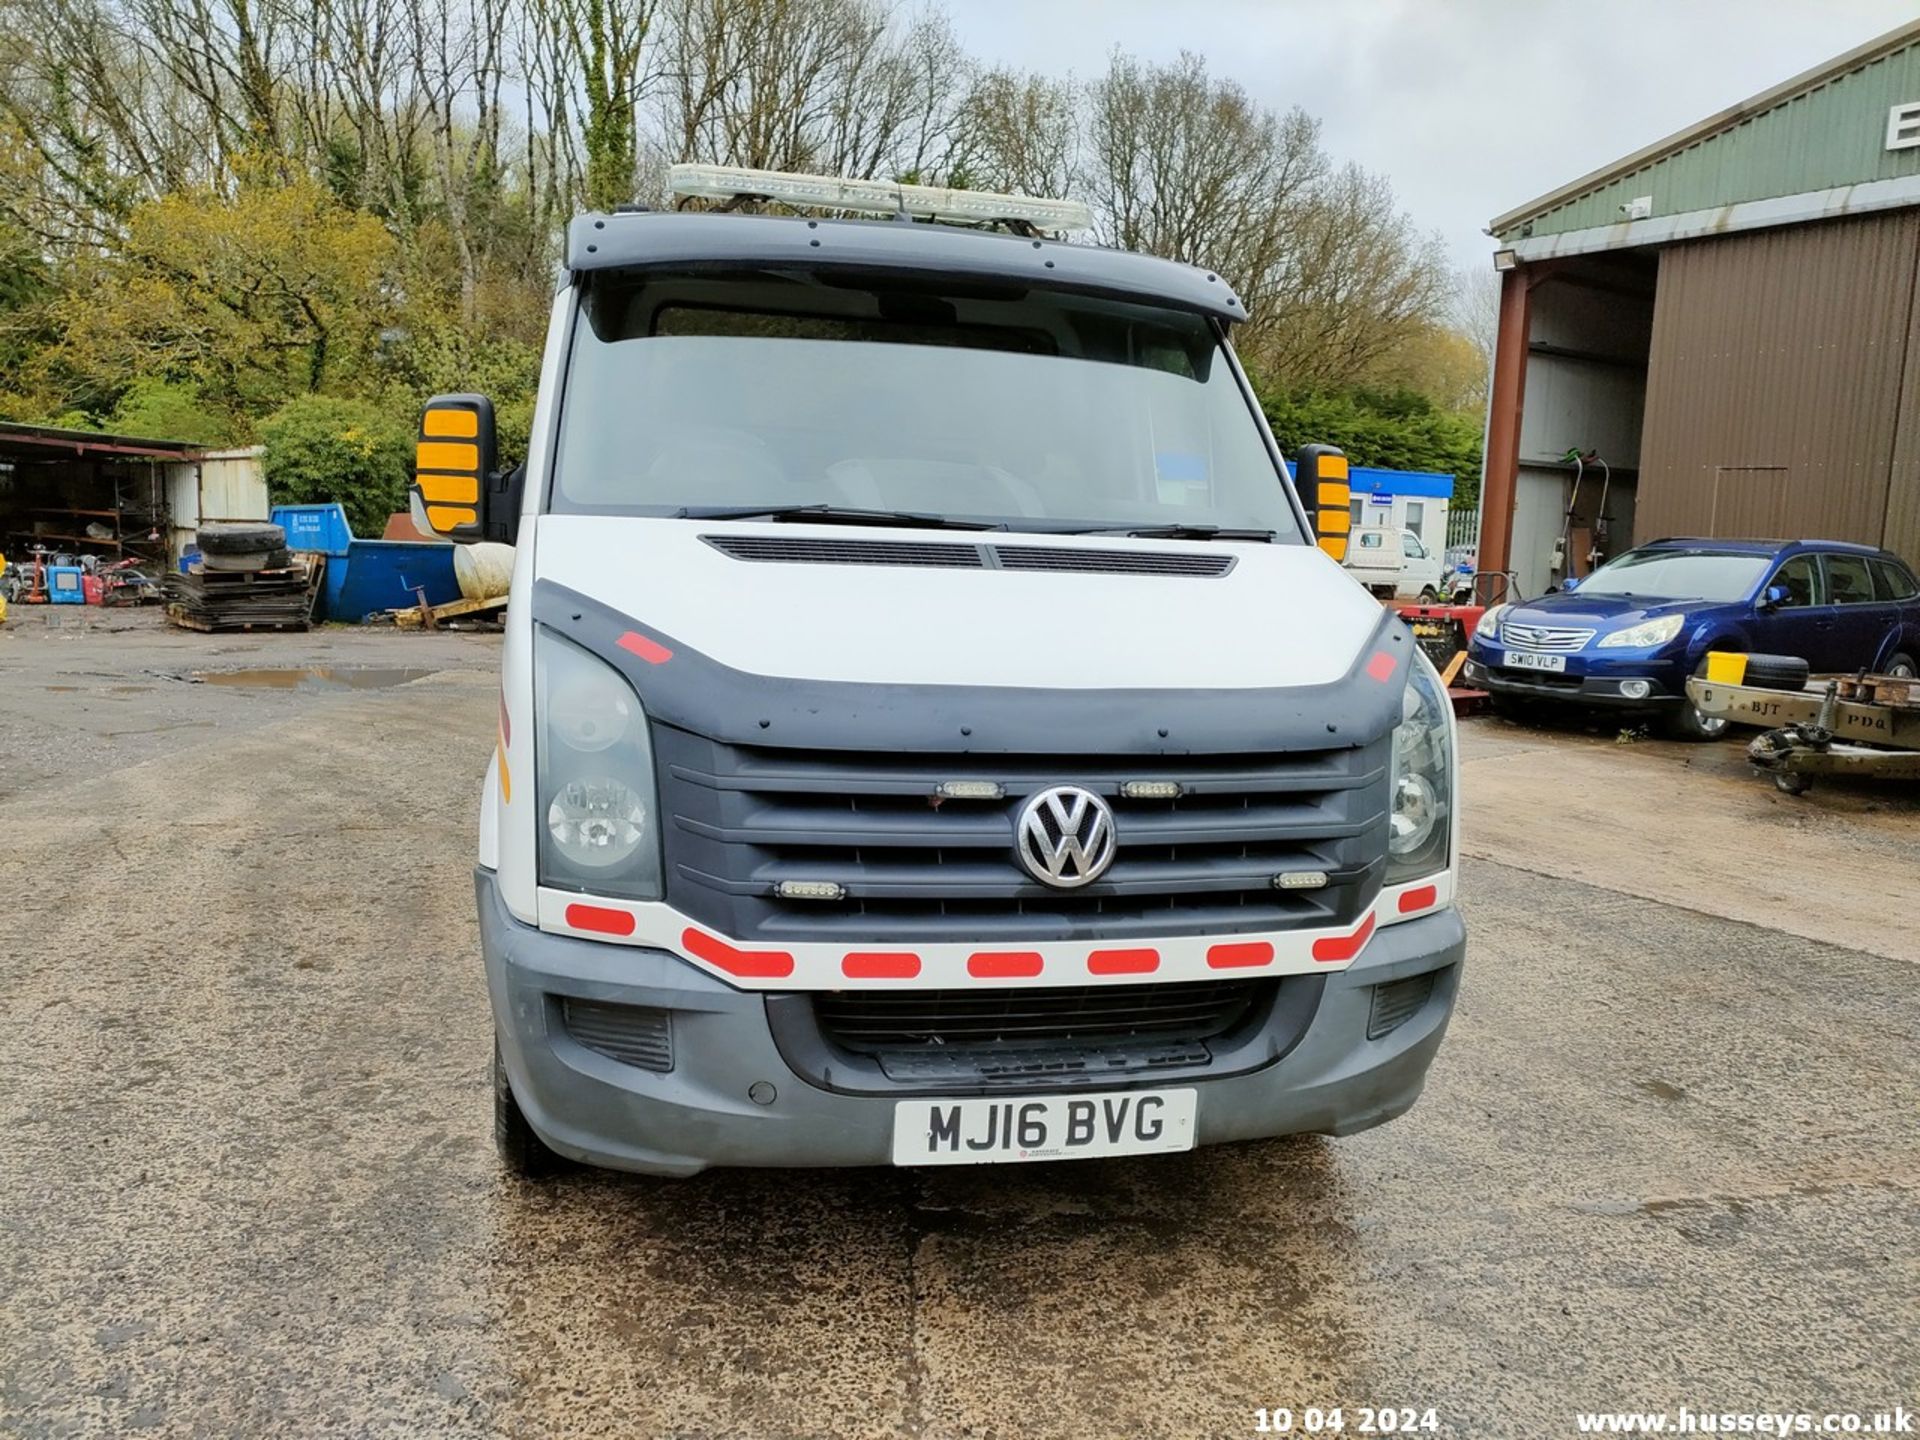 16/16 VOLKSWAGEN CRAFTER CR35 TDI - 1968cc 2dr (White, 146k) - Image 9 of 52